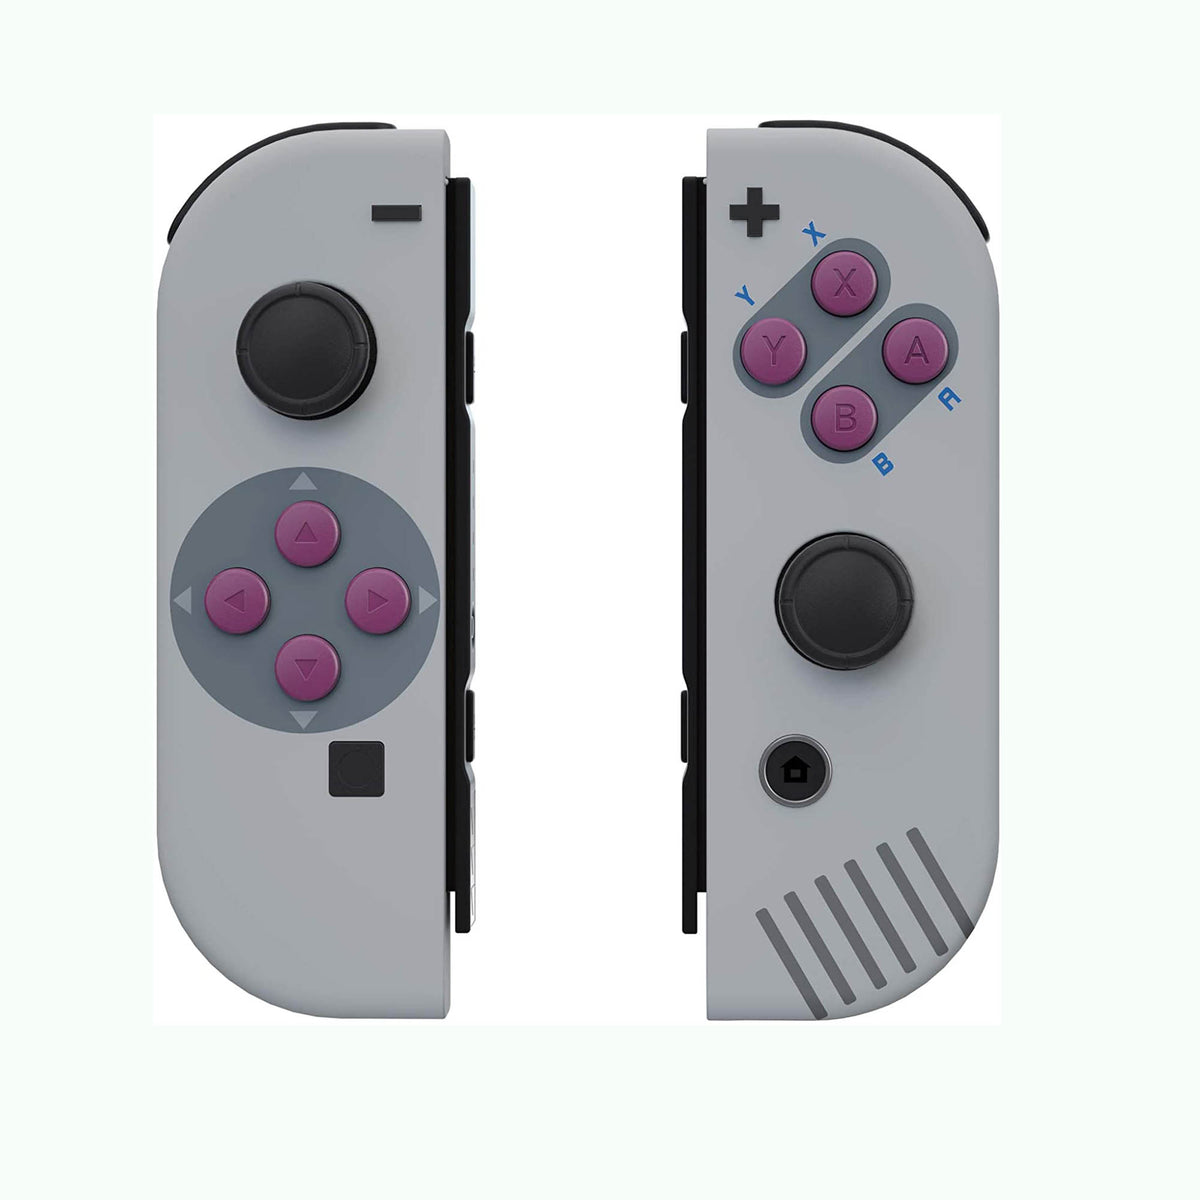 This Joy Boy Switch concept proposes a Joy Con controlled handheld powered  by Nintendo or Raspberry Pi